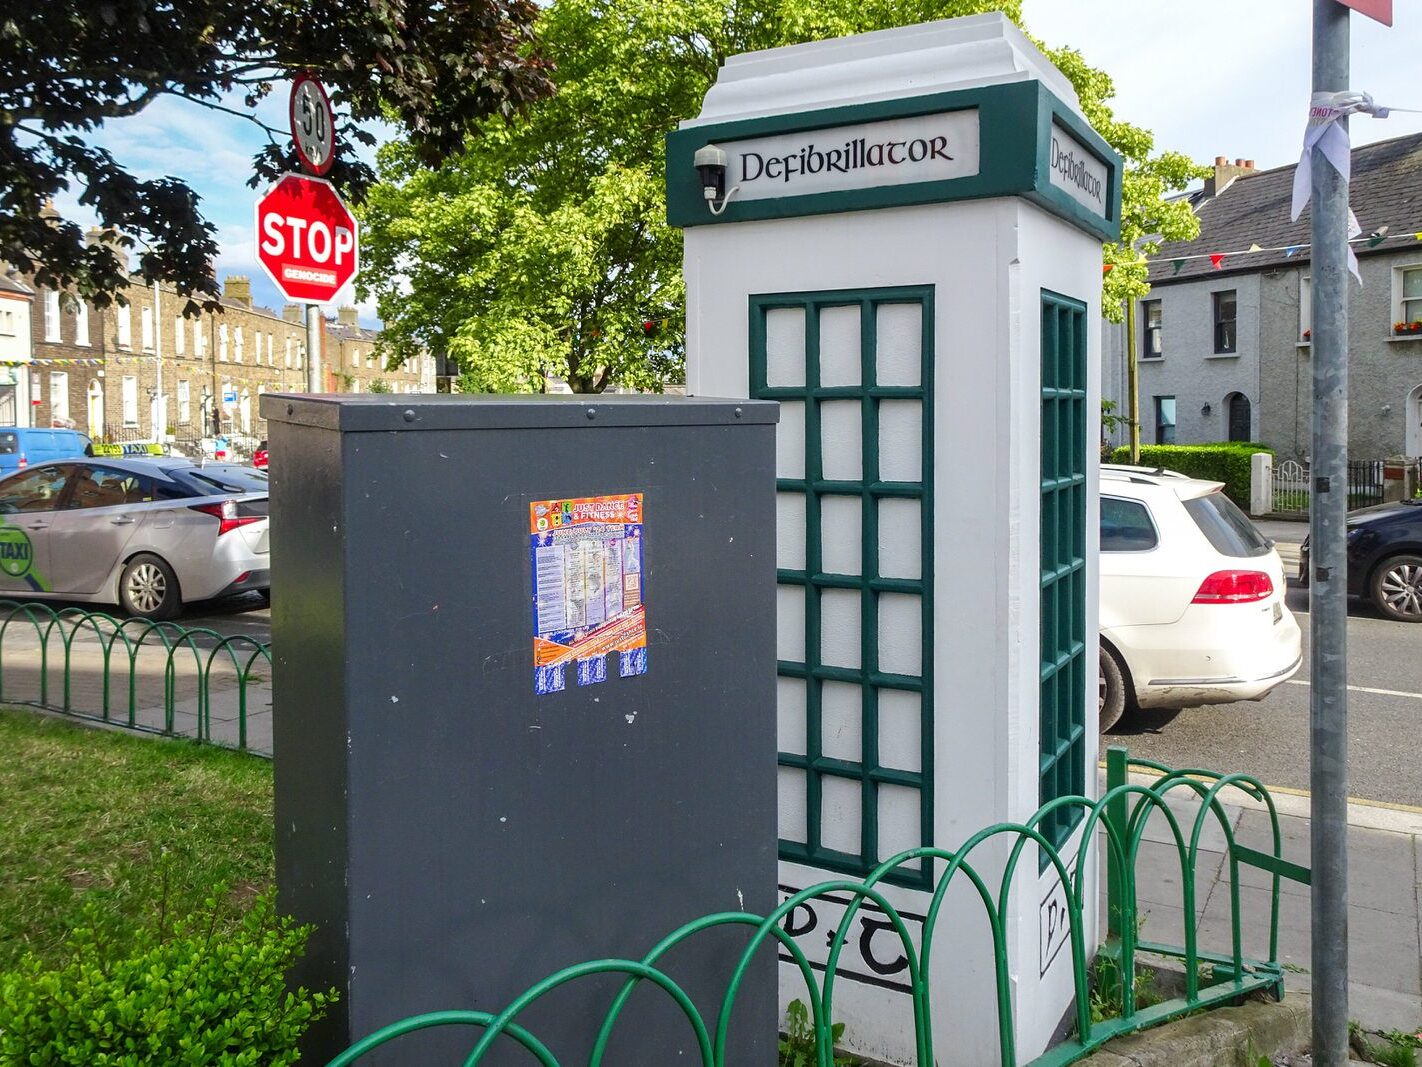 I LIKE THIS IDEA [OLD TELEPHONE KIOSK REPURPOSED AS AN AED] X-236731-1